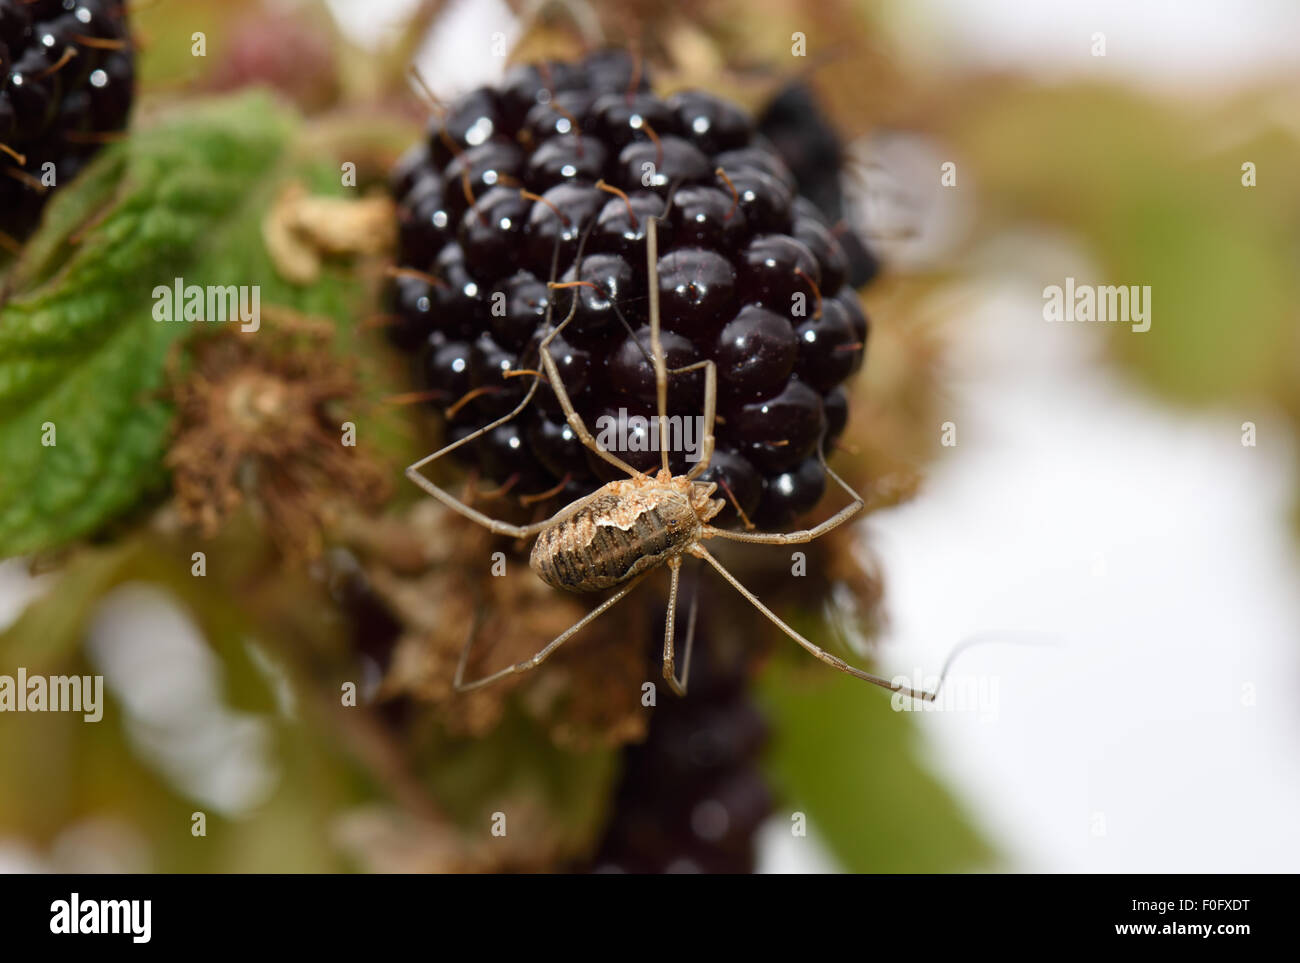 A female harvestman, Phalangium opilio, on a cultivated blackberry fruit in late summer, Berkshire, August Stock Photo